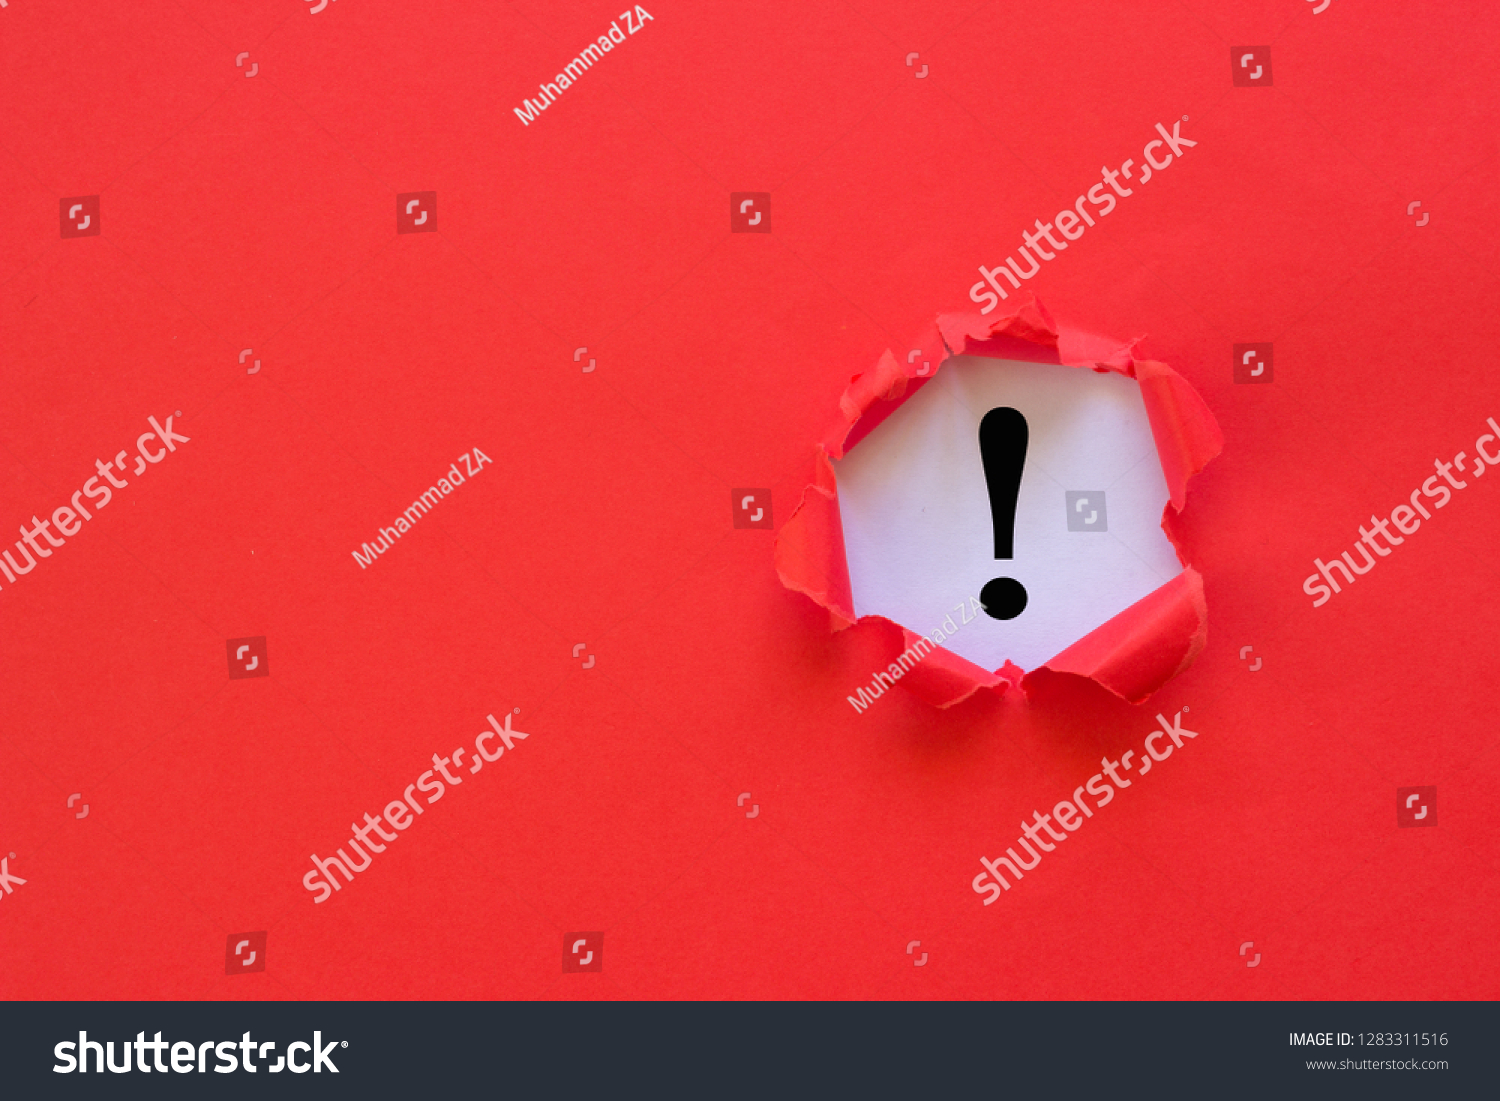 Exclamation mark concept. Torn red paper with exclamation mark on white background. #1283311516